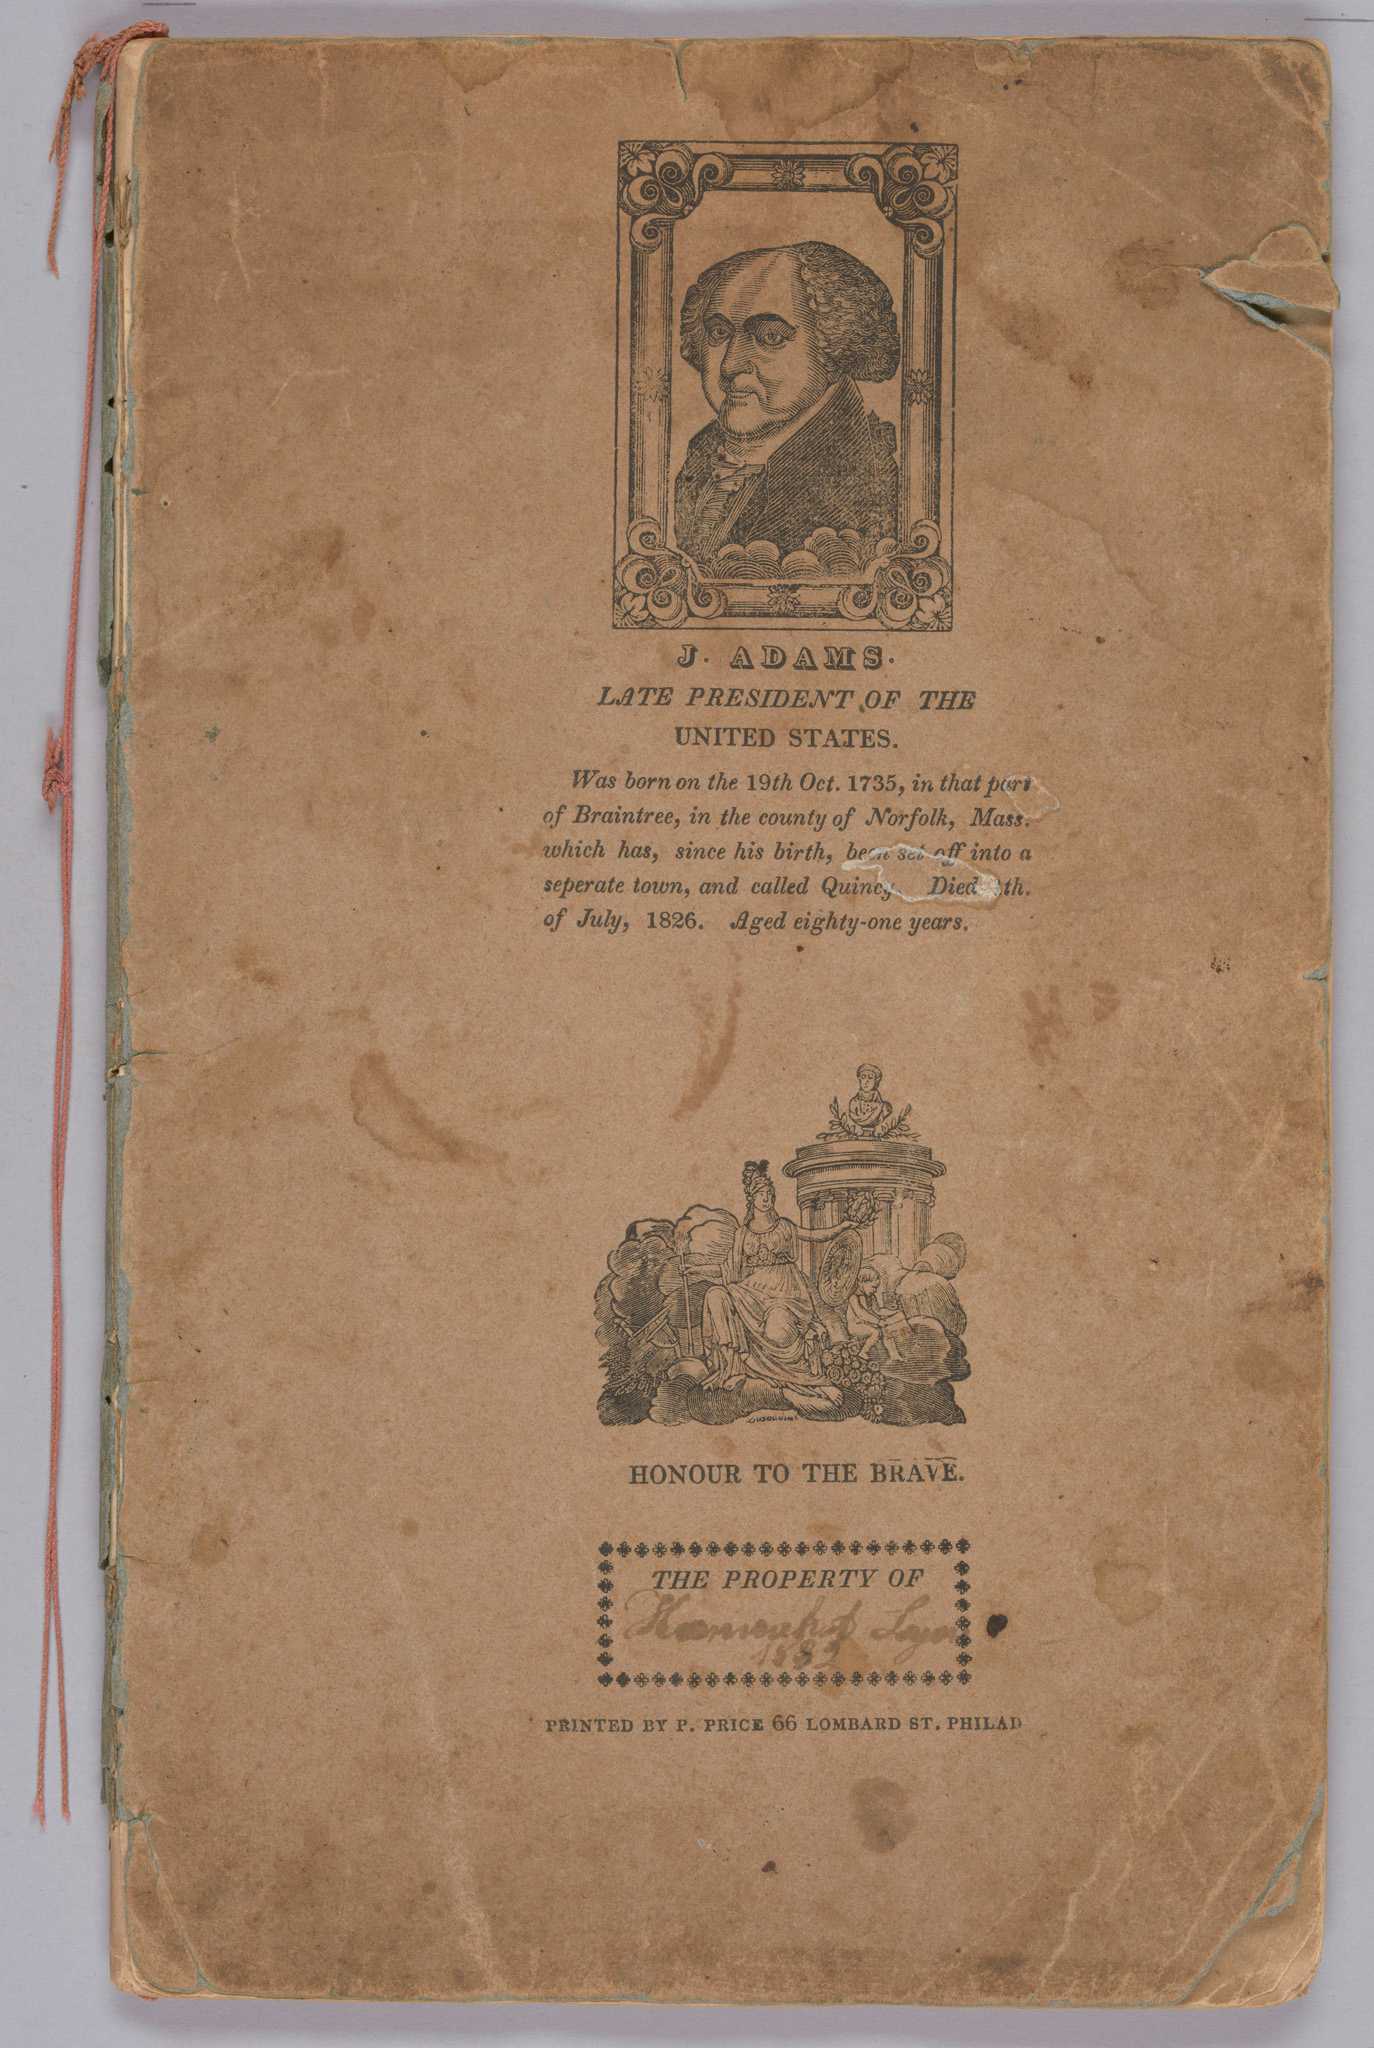 A school copy book printed by Philip Price in Philadelphia, Pennsylvania, and used by Hannah Amelia Lyons. The book has paper covers bound on the proper left side. A length of knotted pink string extends from the top edge of the binding, serving as a bookmark. Several engravings are printed on the front and back covers. On the front cover is a portrait of John Adams entitled "Late President of the United States," above an allegorical scene and space for the owner to sign the book, followed by the printer's name. The back cover has an image of an eagle flying over open waters between two ships and clasping a banner reading "SHIPPED" in its beak. Below the eagle is a floral sprig on the left and a grouping of masonic symbols on the right, with a thin scrollwork border below them. Below the border is a shield with an eagle inside it holding a banner reading "E Pluribus Unum". Below the shield are two separate allegorical scenes. The interior pages contain various school exercises including mathematics and poetry, with inscriptions dating from 1830 to 1836. On the front cover, within a printed box at bottom center is "THE PROPERTY OF" with the signature [Hannah A. Lyons / 1832].